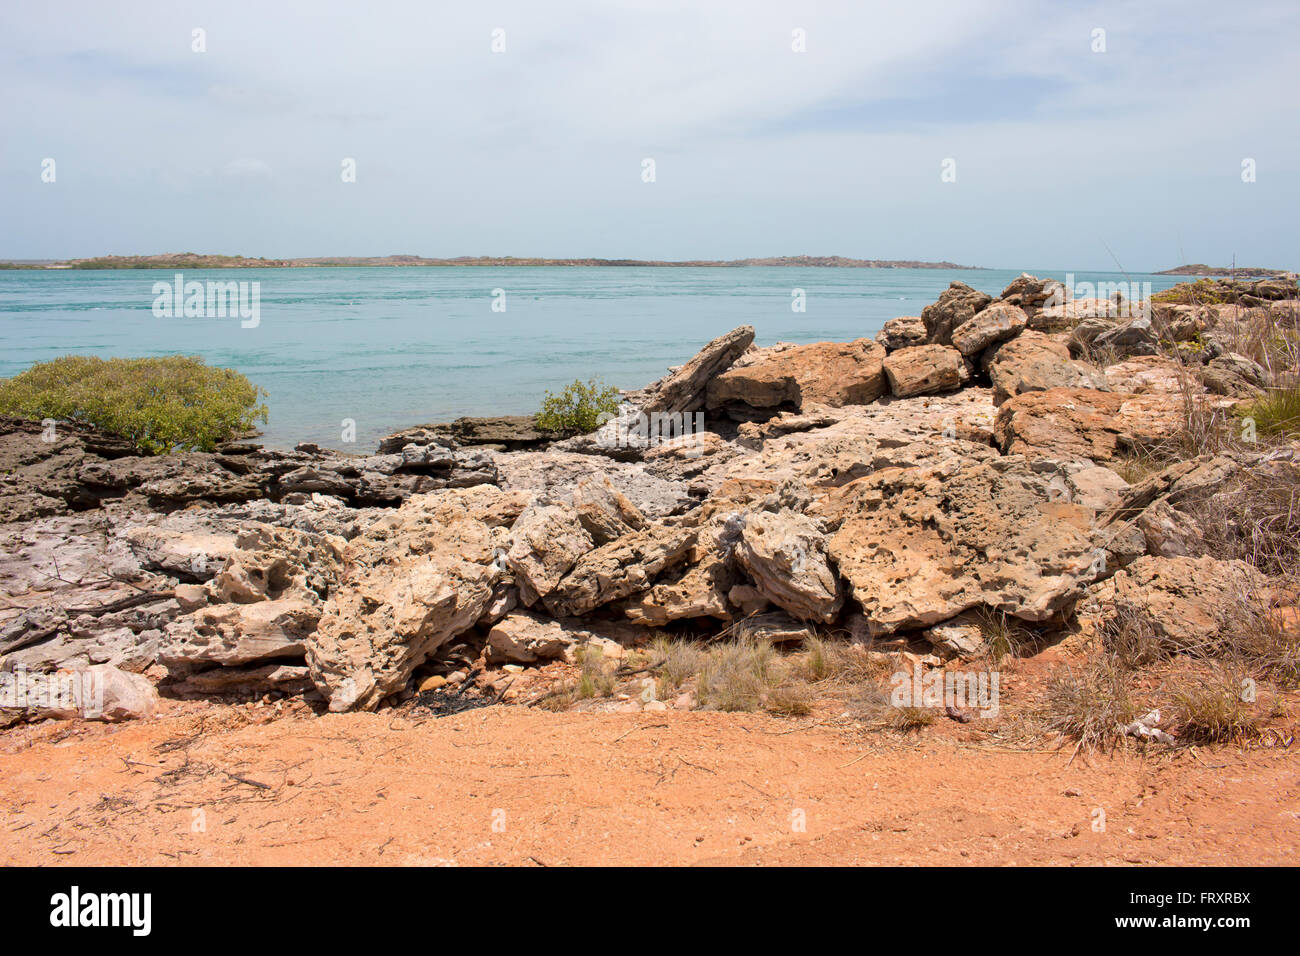 Landscape at One Arm Point, Ardyloon, or Bardi in Kimberley region of North Western Australia, an isolated very remote indigenous community . Stock Photo